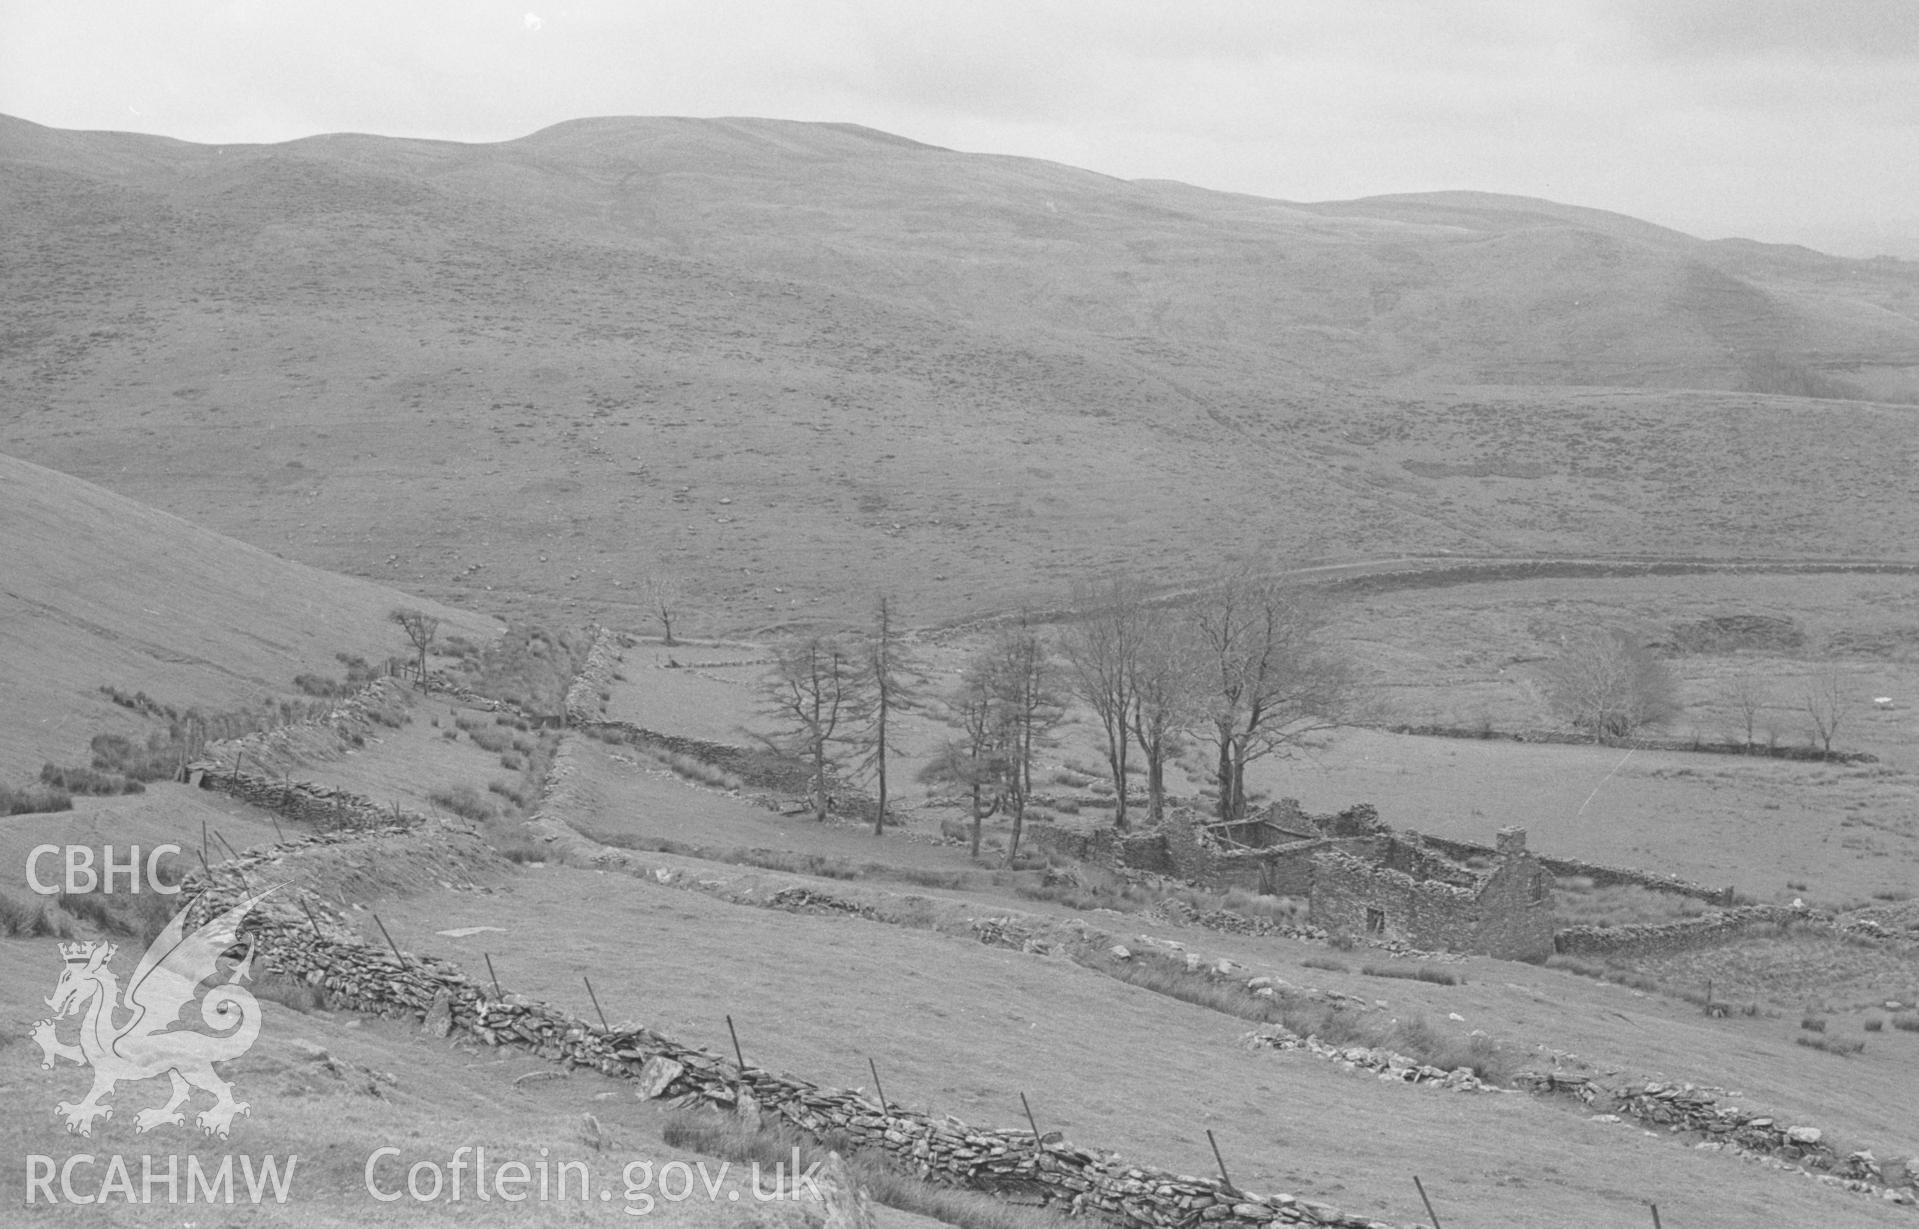 Digital copy of black & white negative showing view across ruins of Tan-y-Graig to Groes Fechan valley; trackway leading up to Carn Gron on the left. Photographed by Arthur O. Chater in April 1966 from Grid Ref SN 730 606, looking south south west.